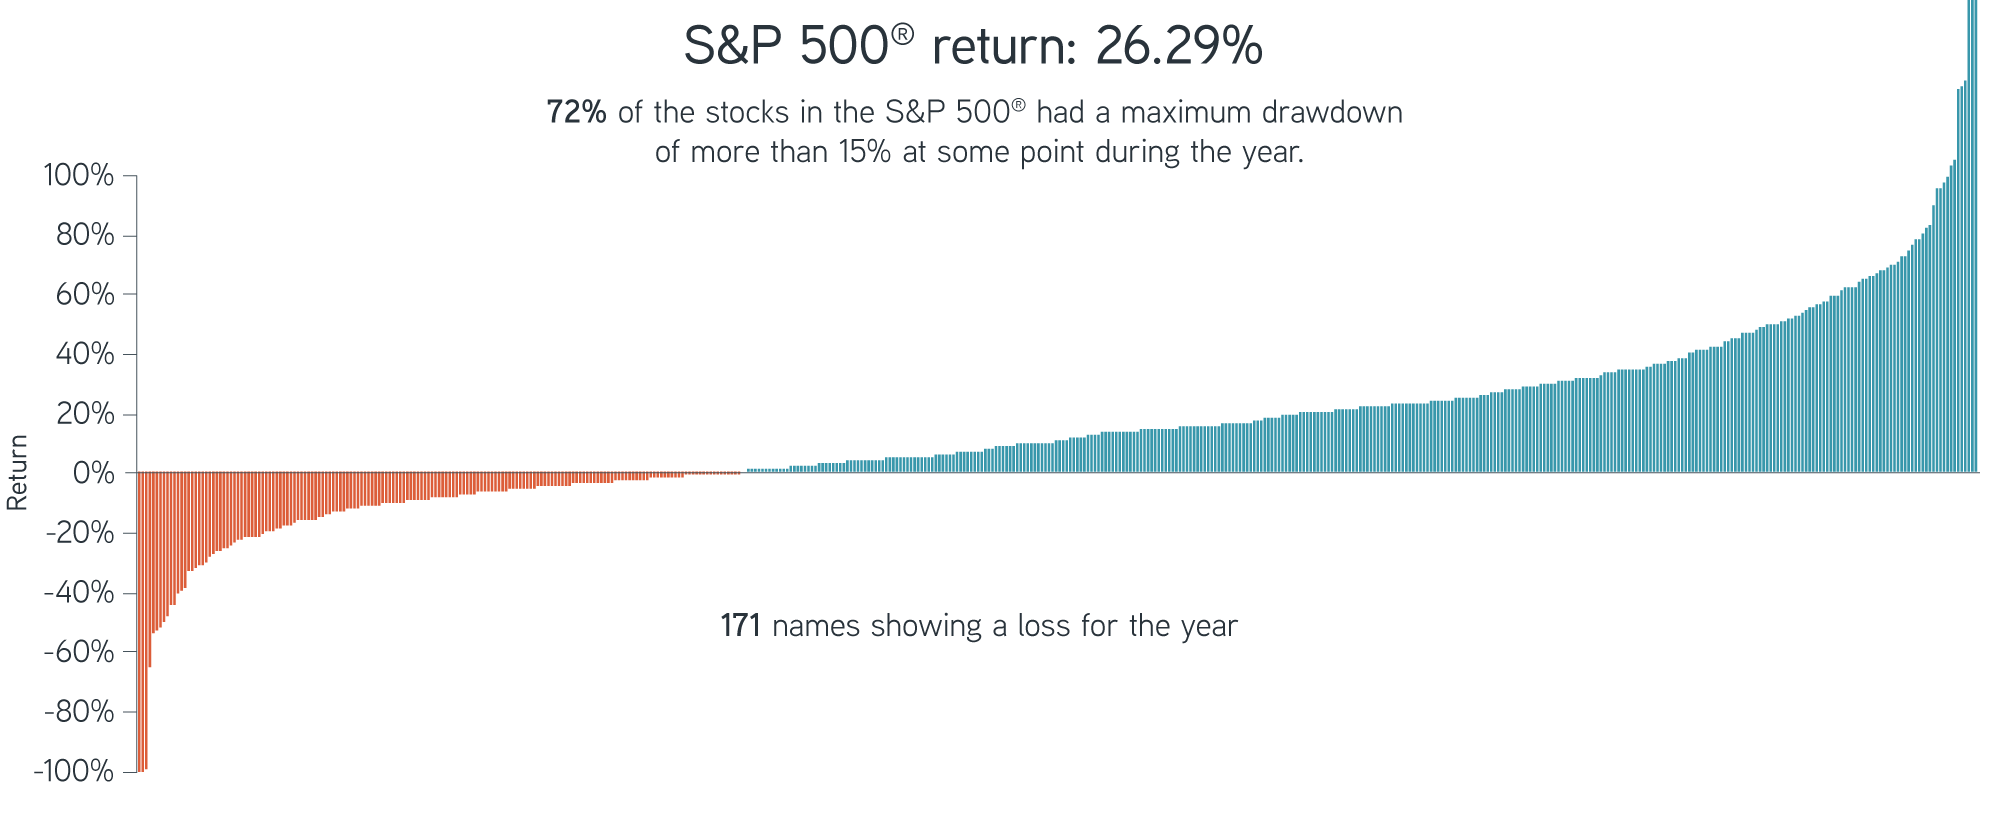 72% of the stocks in the S&P 500® had a maximum drawdown of more than 15% at some point during the year.